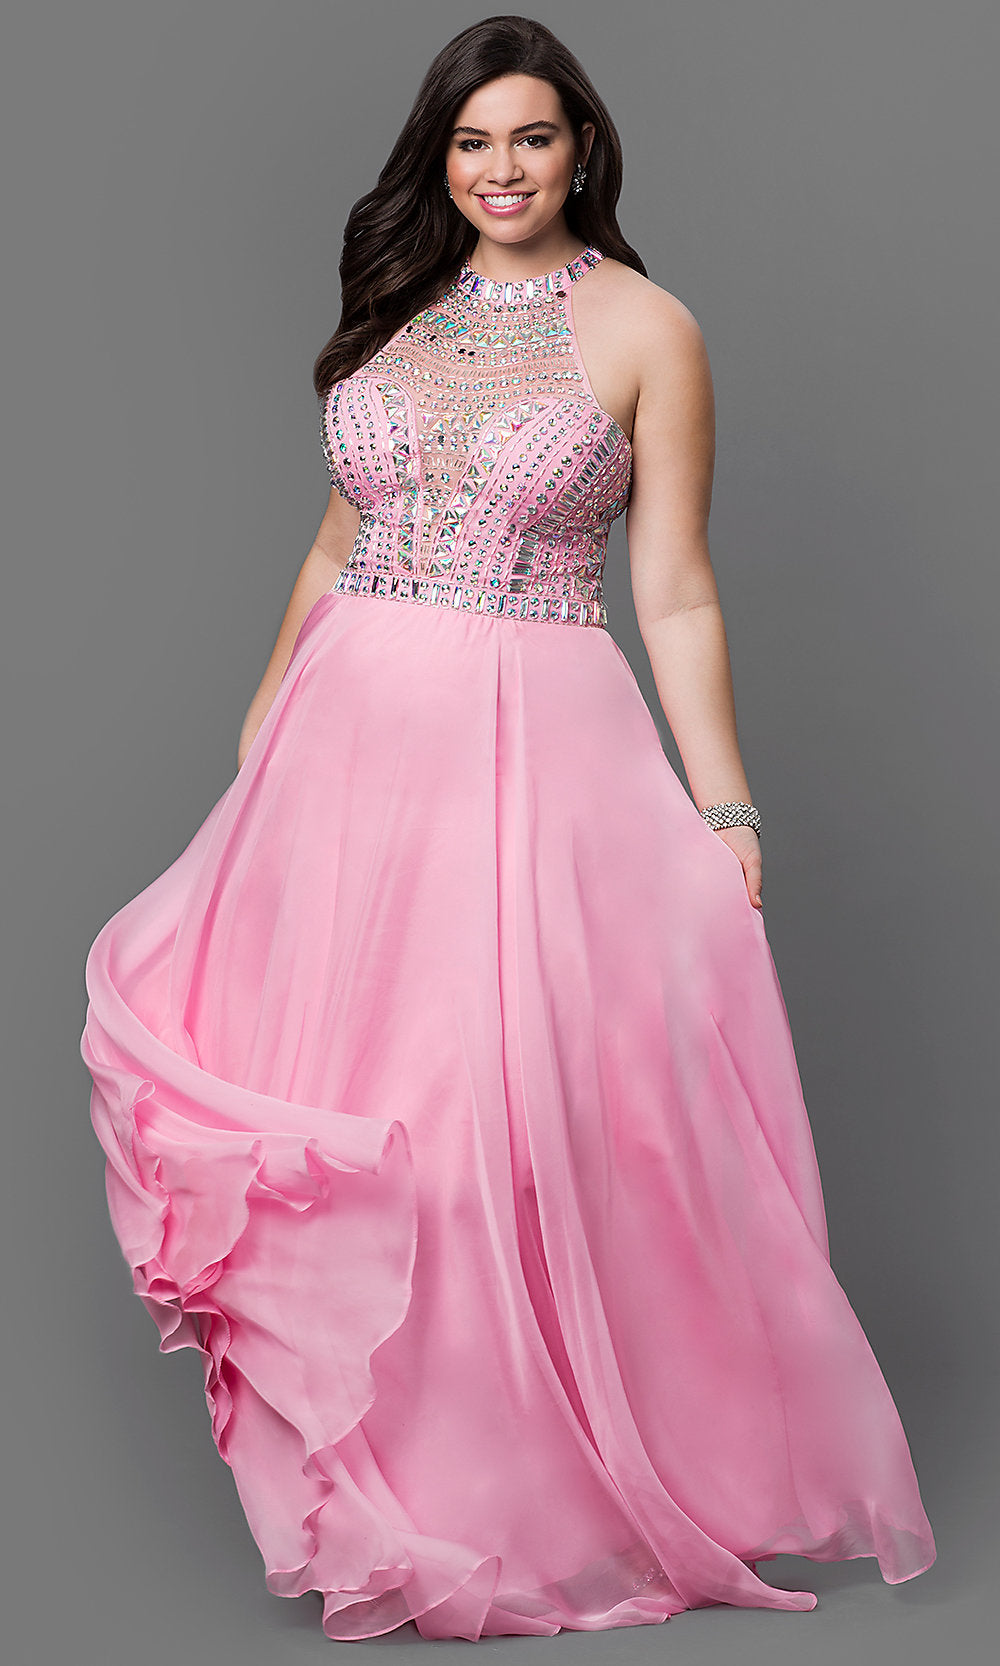 Baby Pink Beaded High-Neck Long A-Line Prom Dress